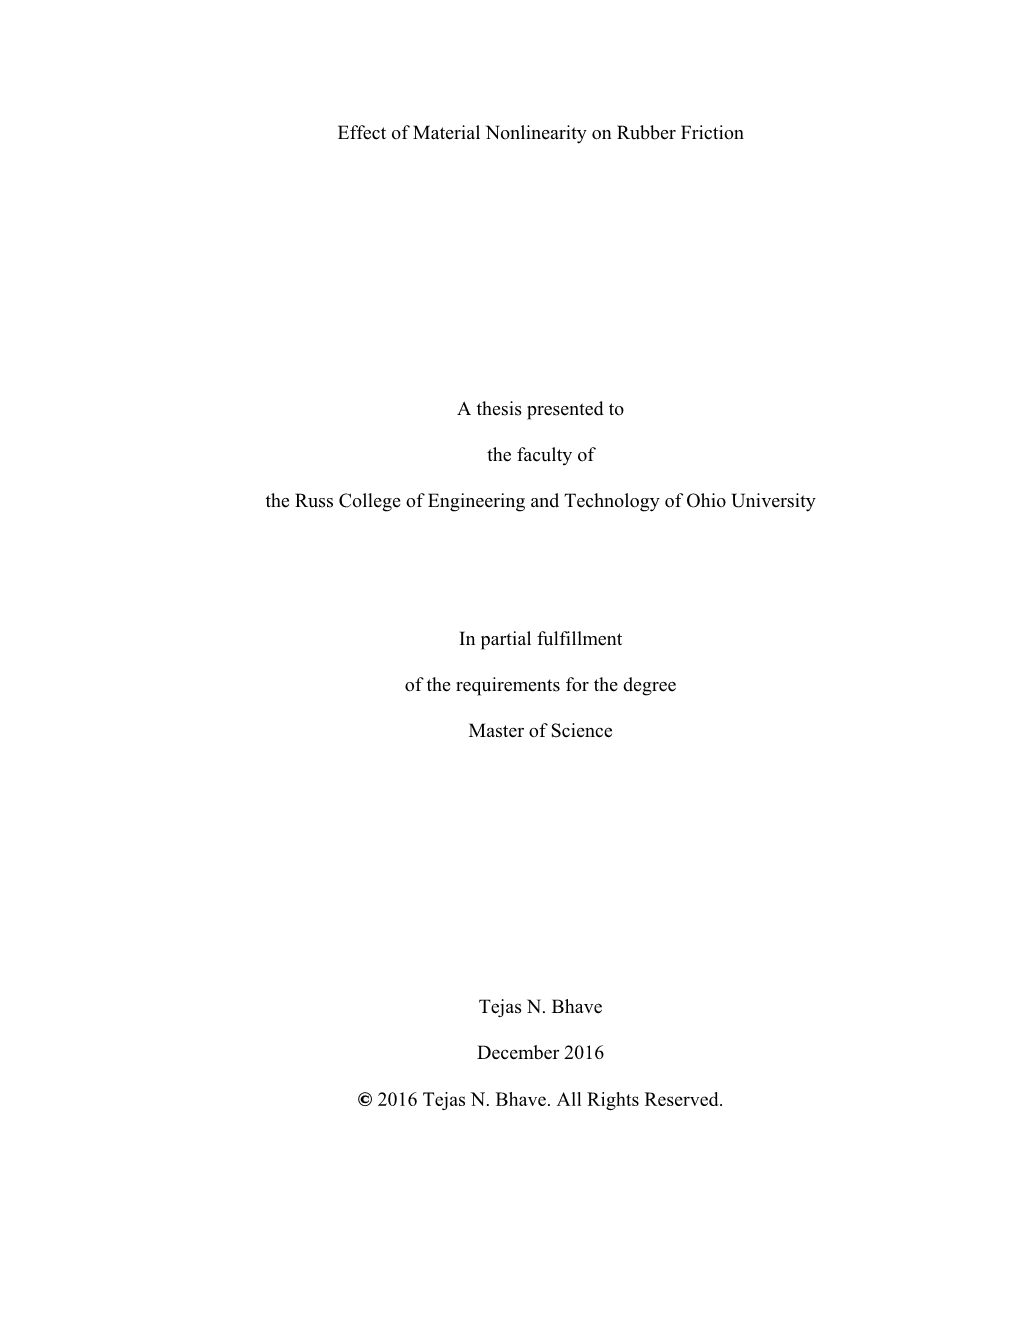 Effect of Material Nonlinearity on Rubber Friction a Thesis Presented